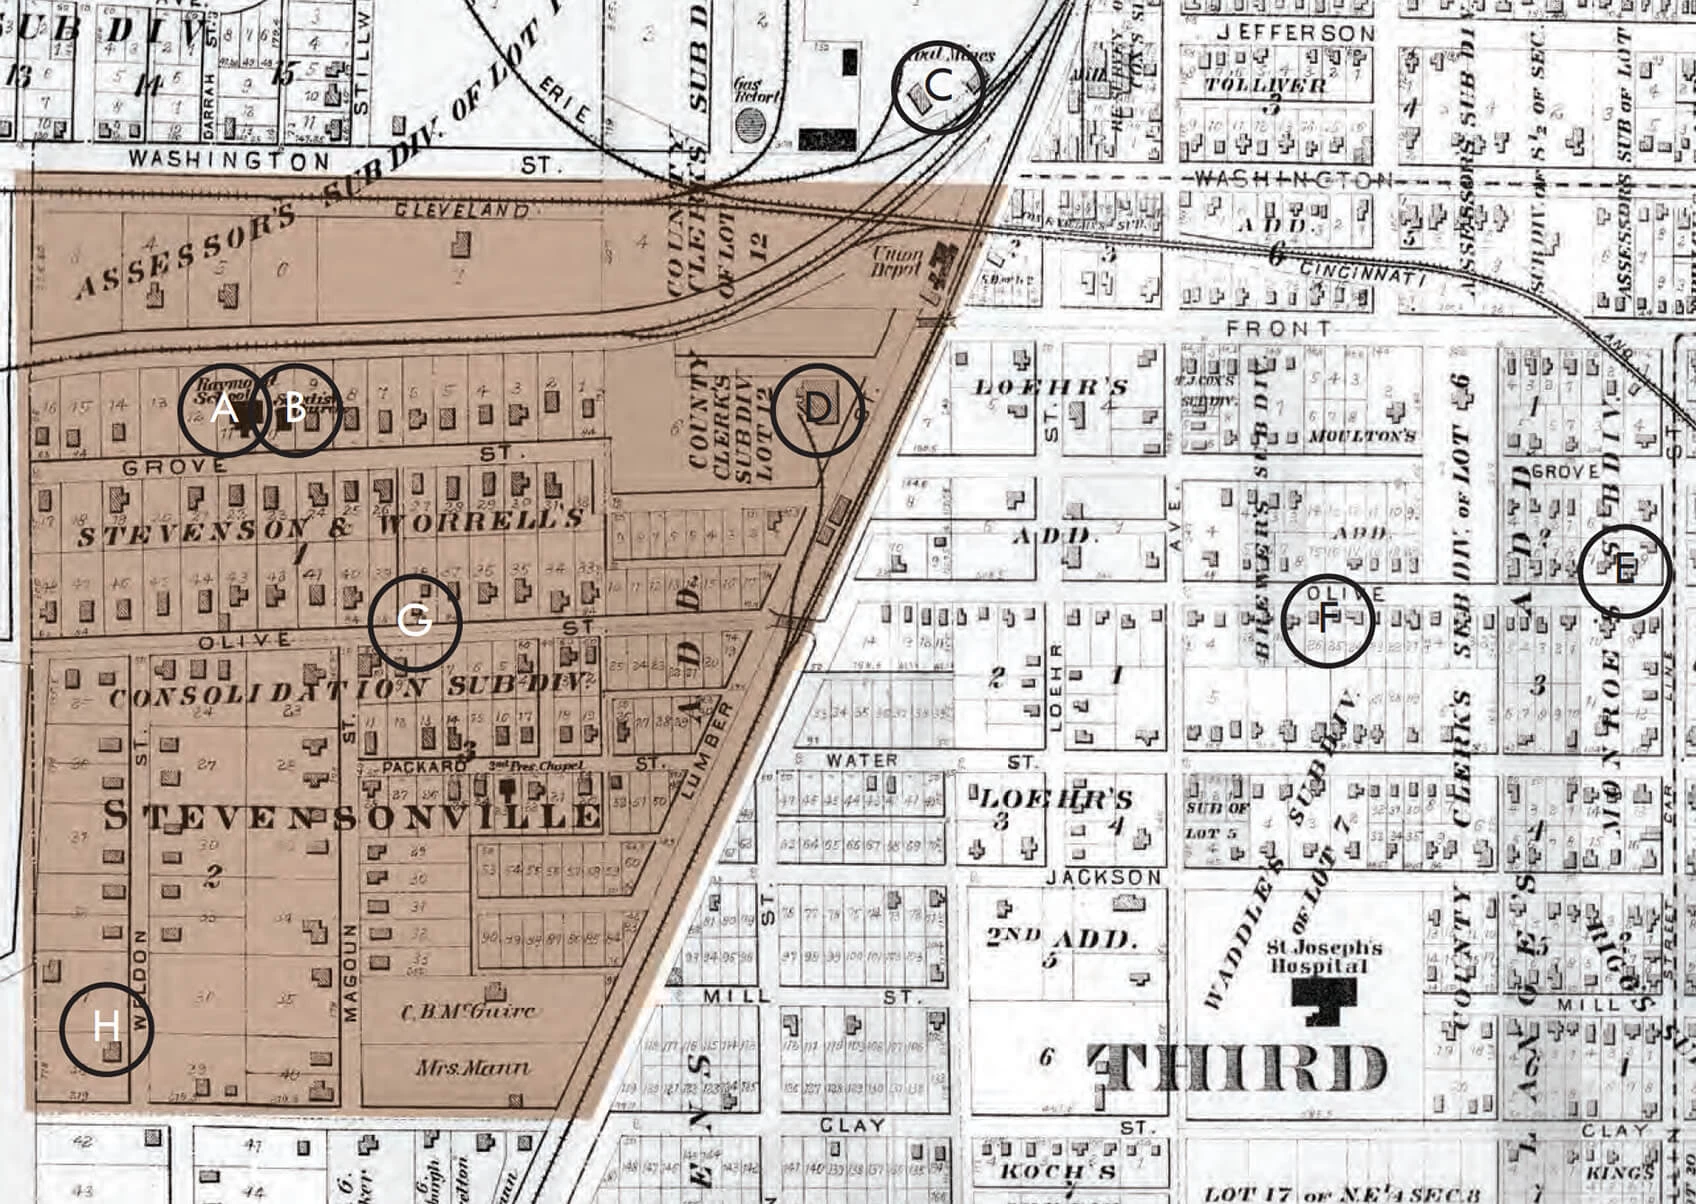 plat map with an area of the West side of Bloomington shaded, indicating the neighborhood.